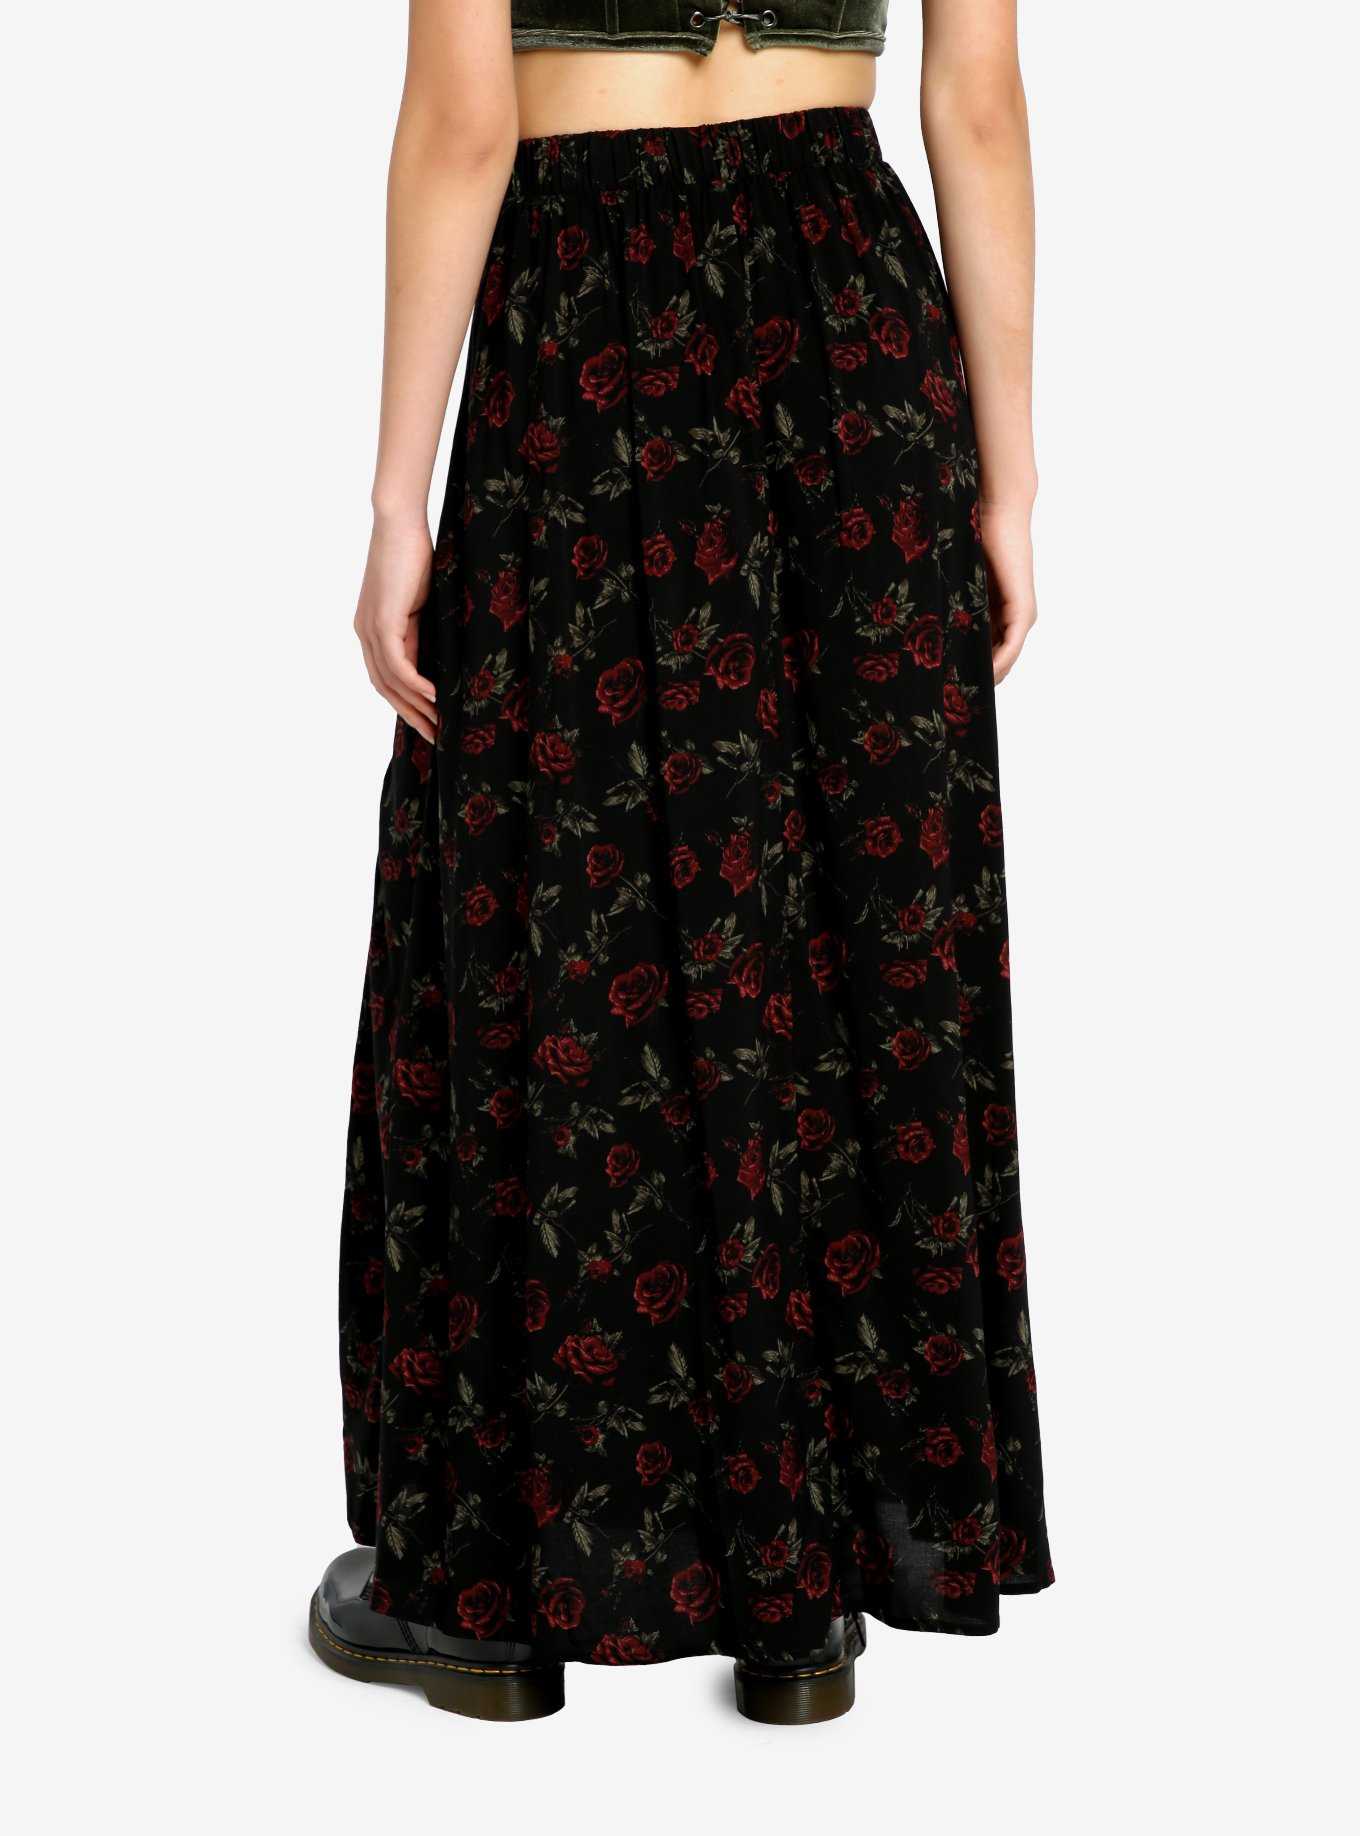 Thorn & Fable Dark Red Rose Lace-Up Maxi Skirt, , hi-res